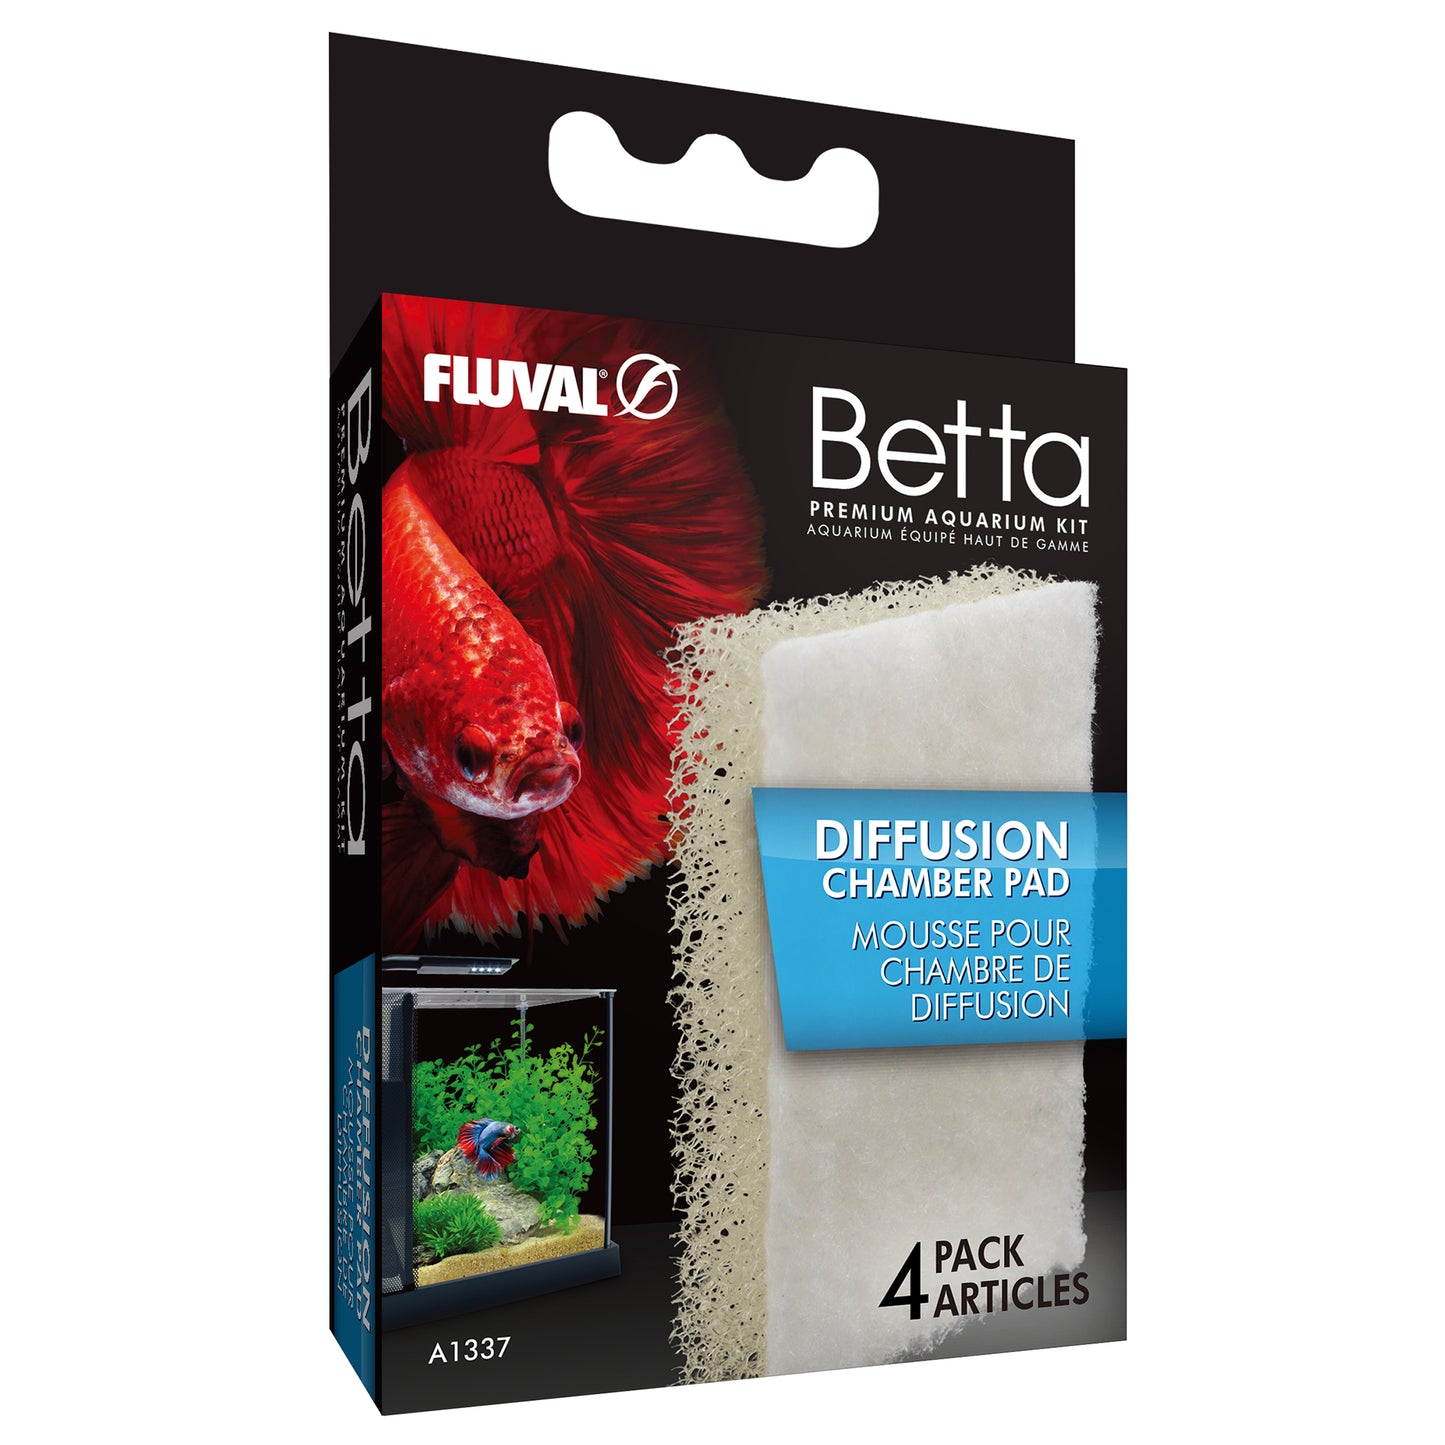 Fluval Betta Diffusion Chamber Pad, 4-Pack